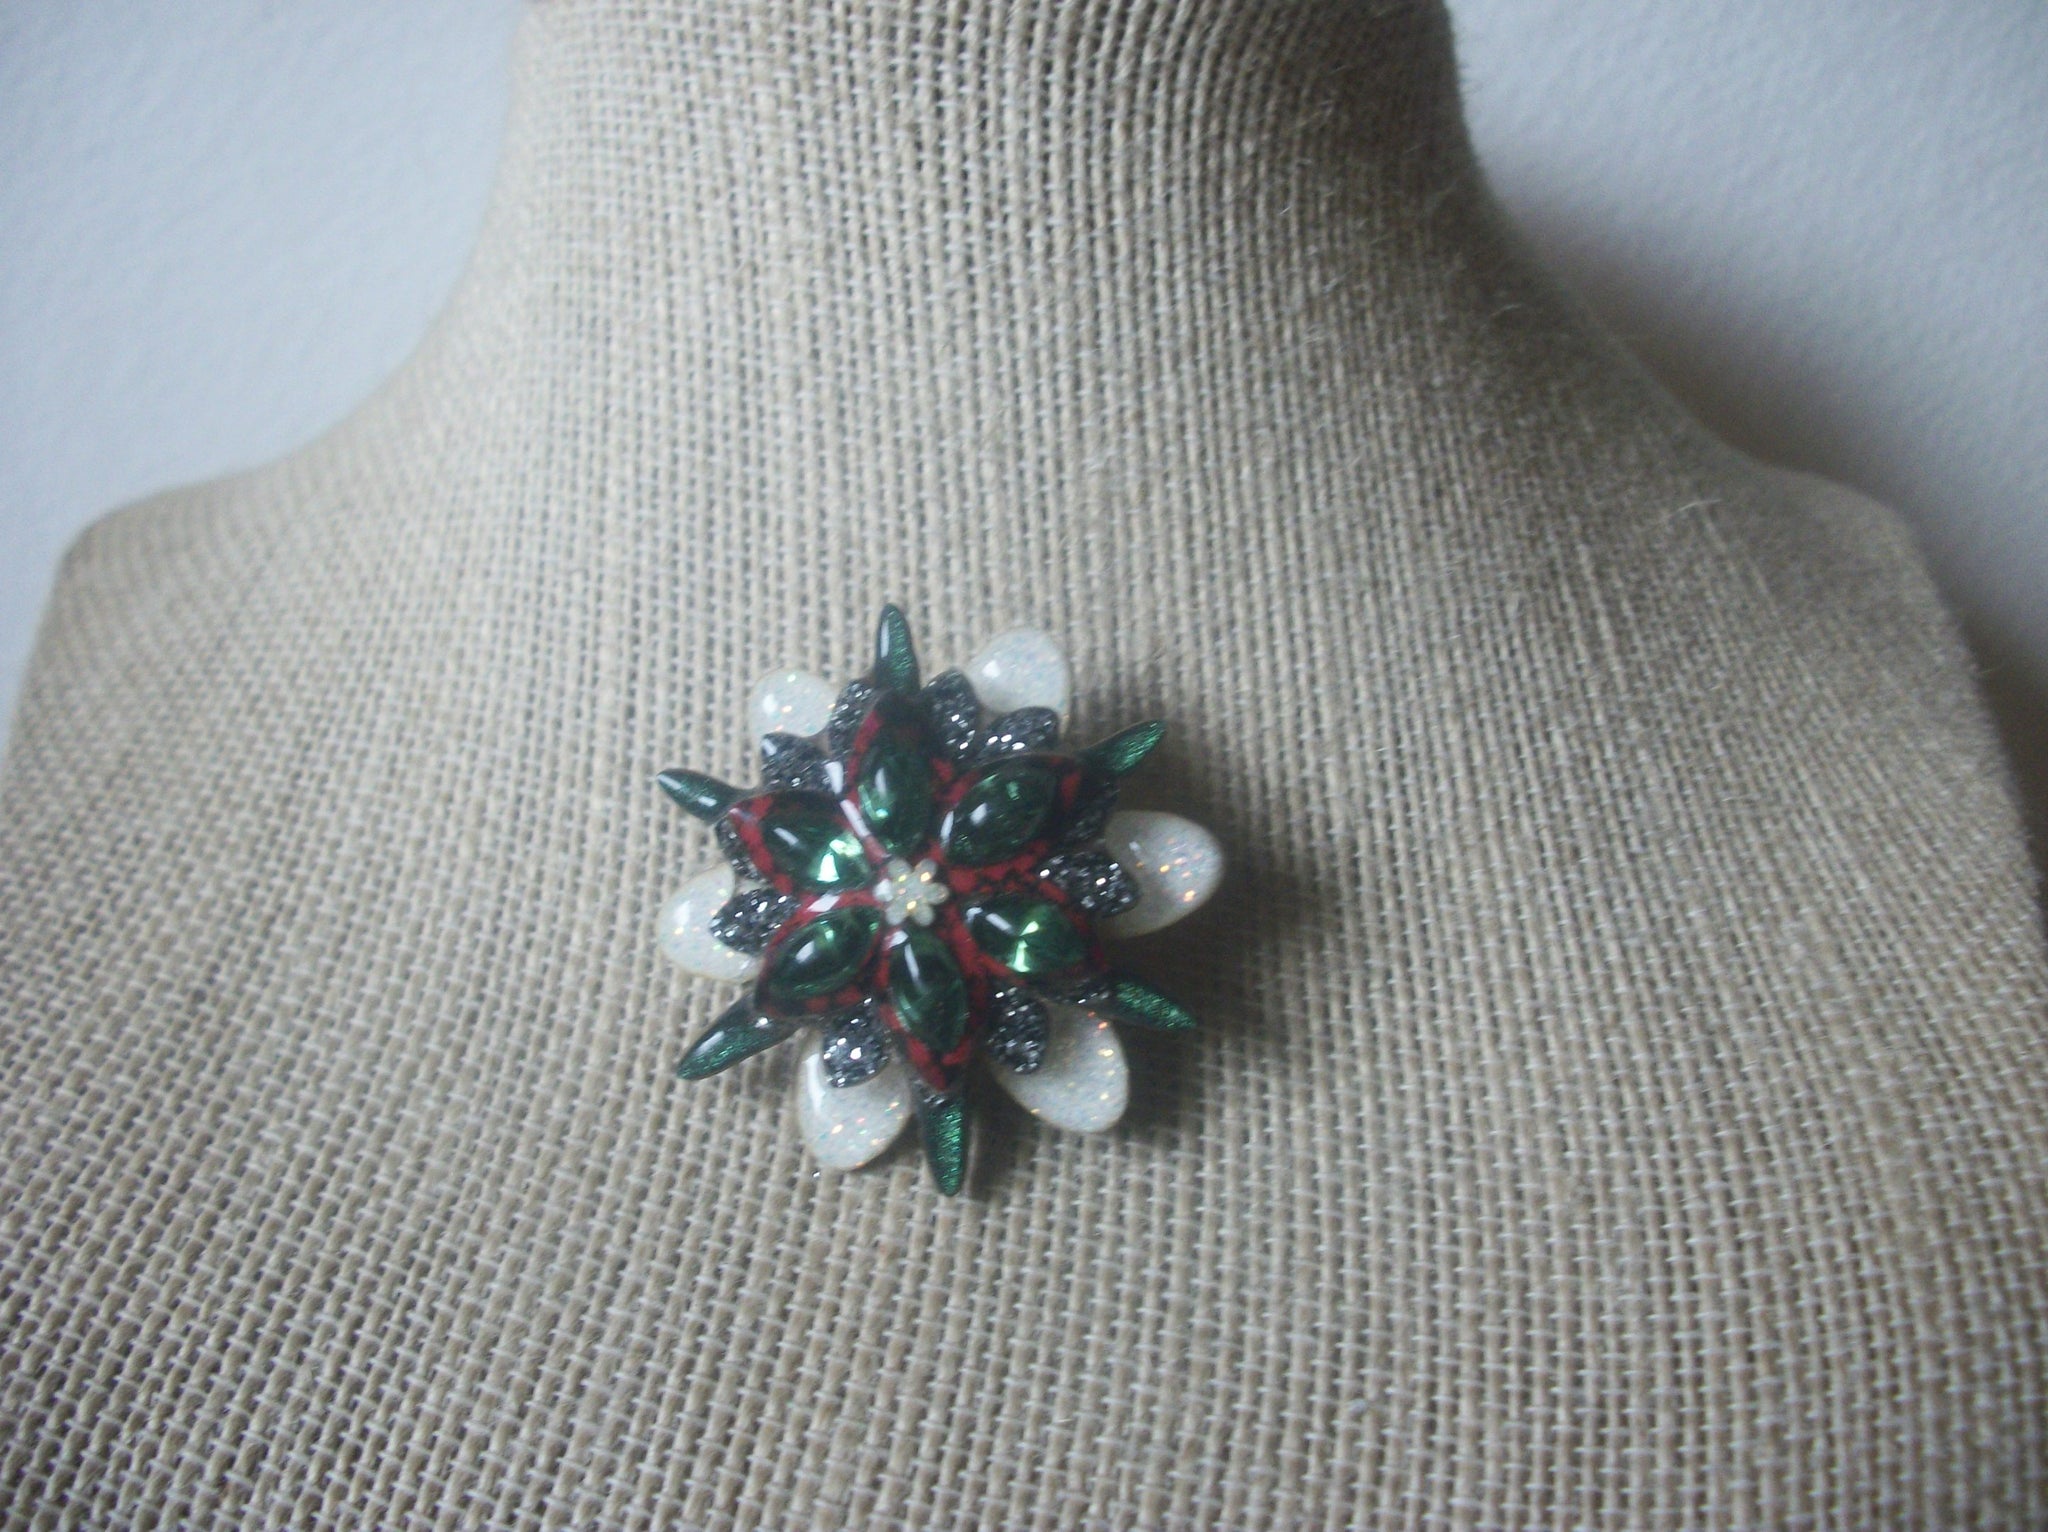 RARE, Vintage Brooch Pin, Designs By Lucinda, Snowflake, Bejeweled Glitter, Rhinestones Lucite, Pins By Lucinda 021321